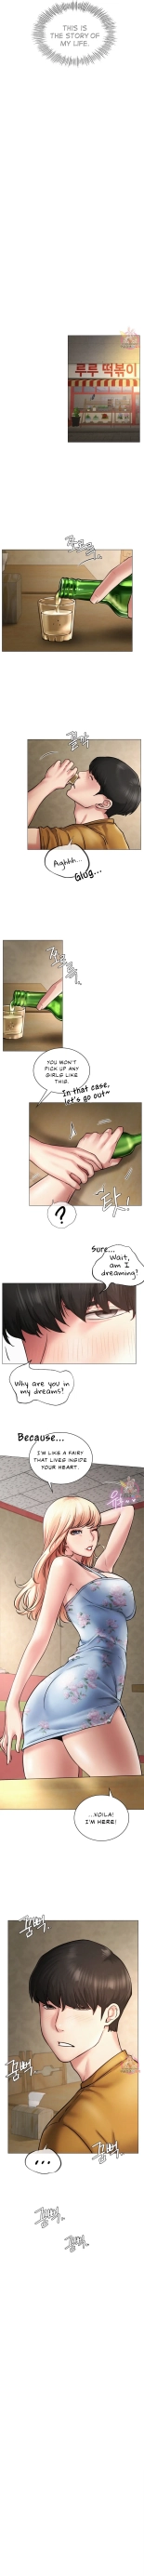 Staying with Ajumma : page 44